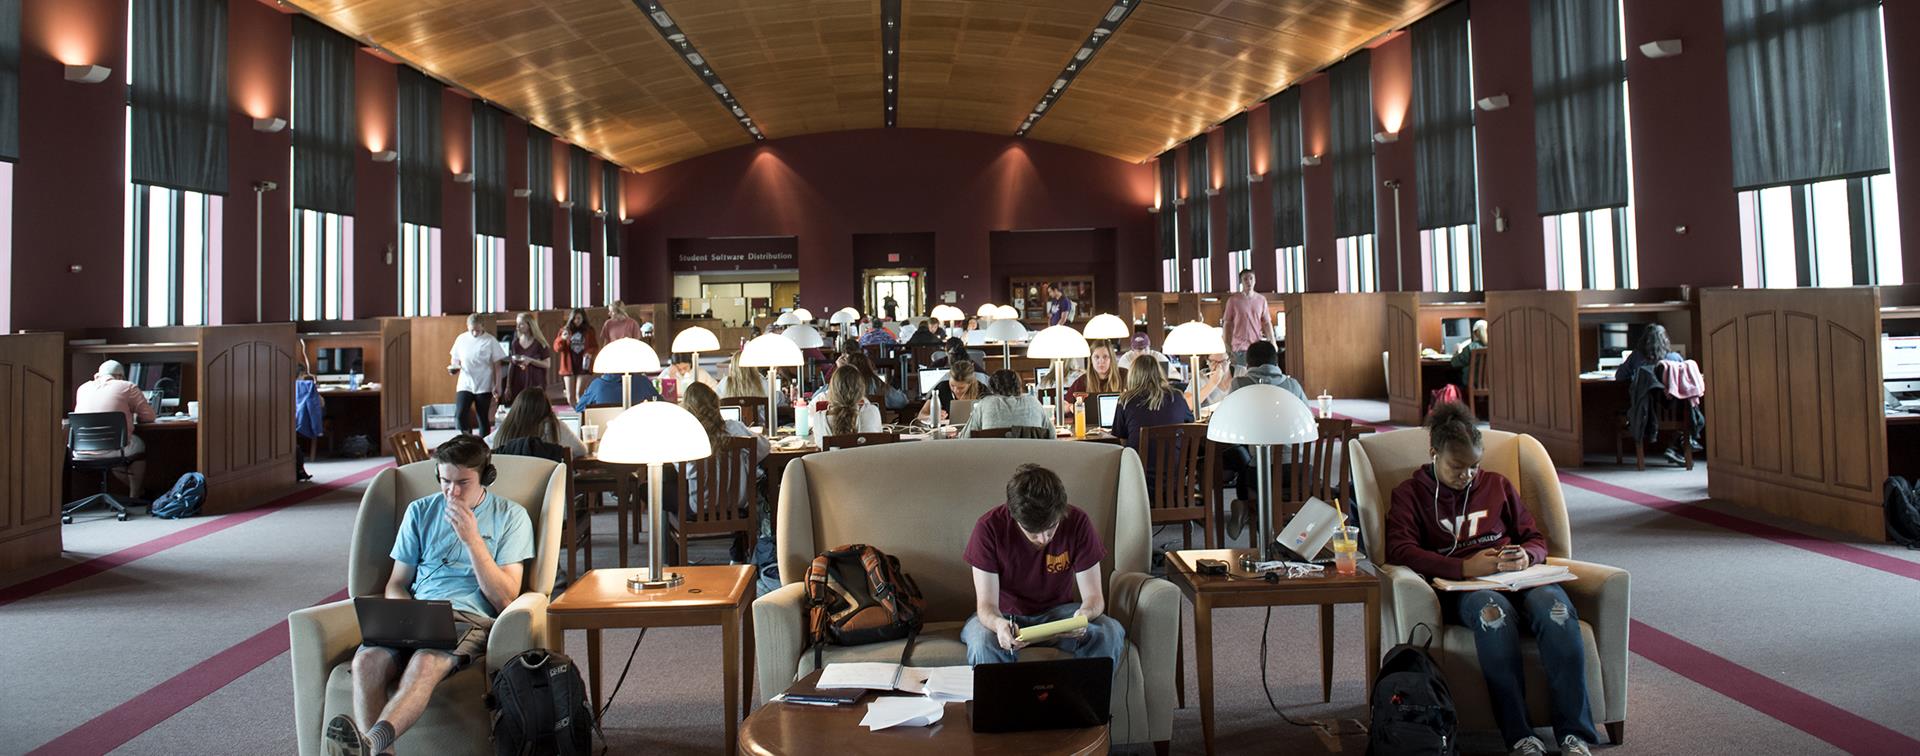 An image is students studying in the library at Virginia Tech. People sit with books and computers in front of them at tables.